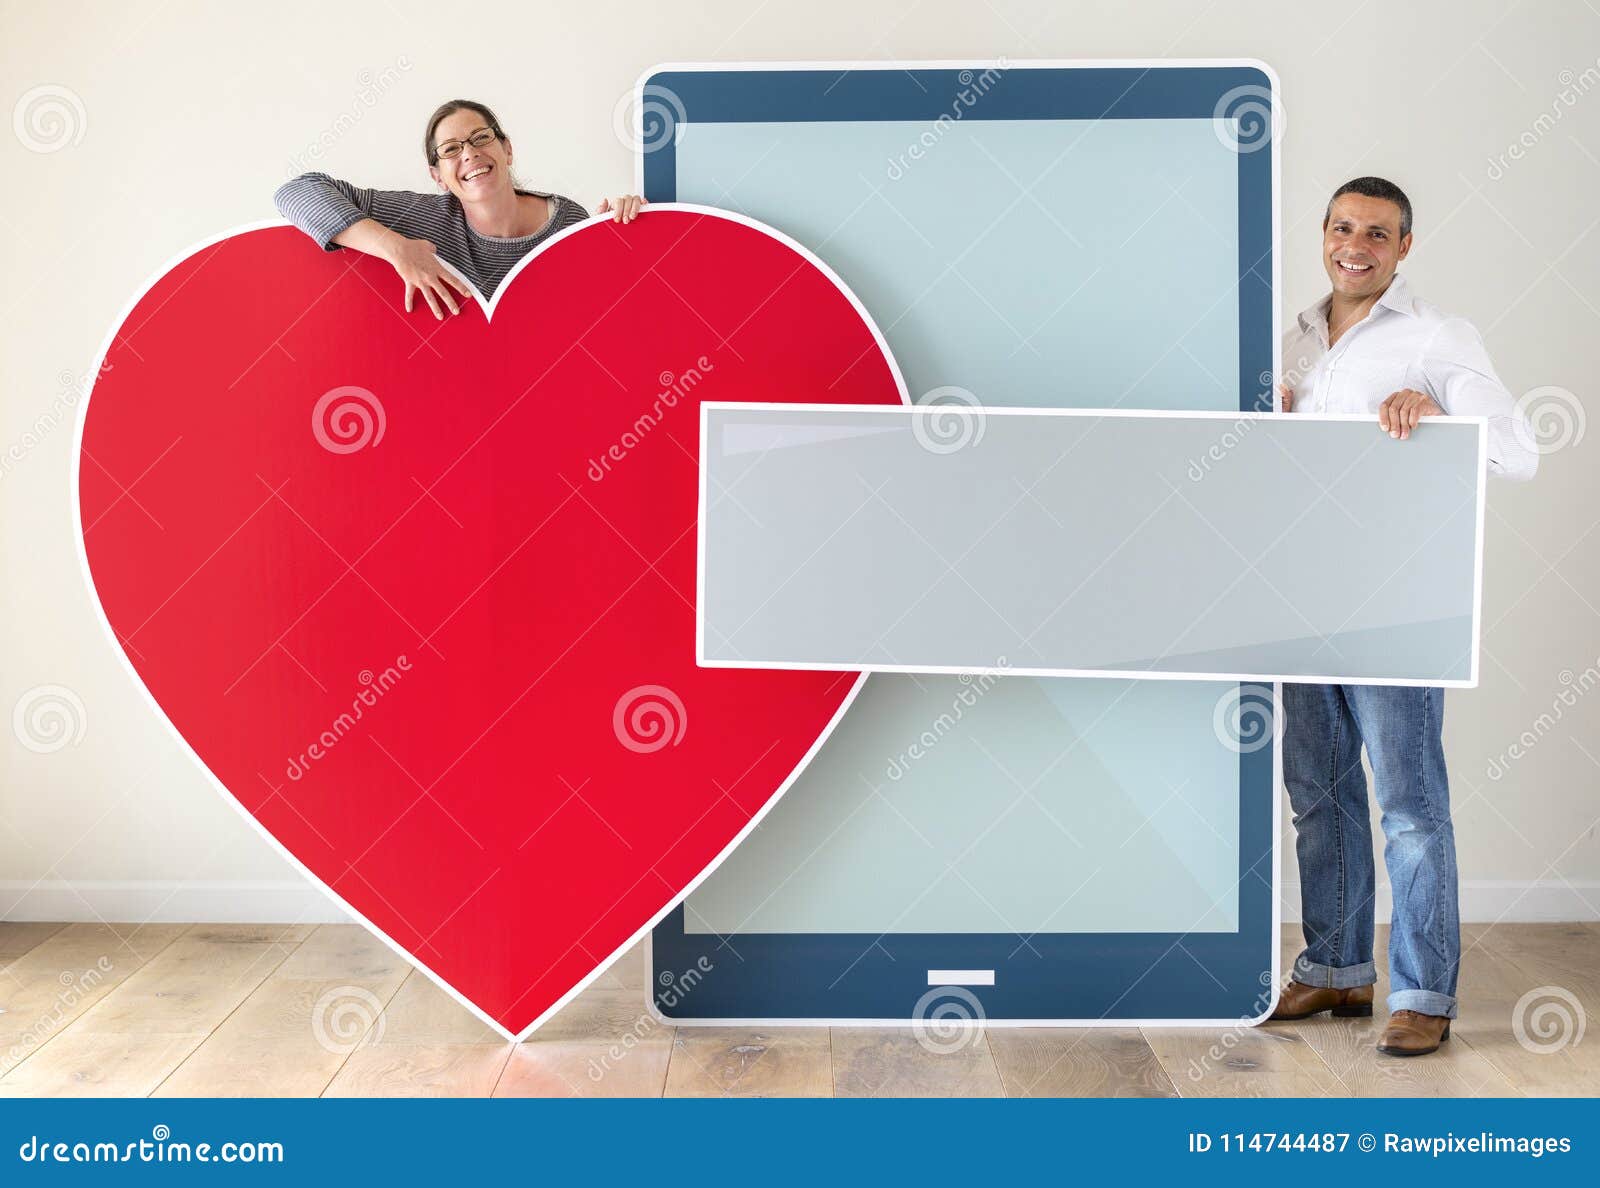 Couple Meeting Through A Dating App Stock Image - Image of ...